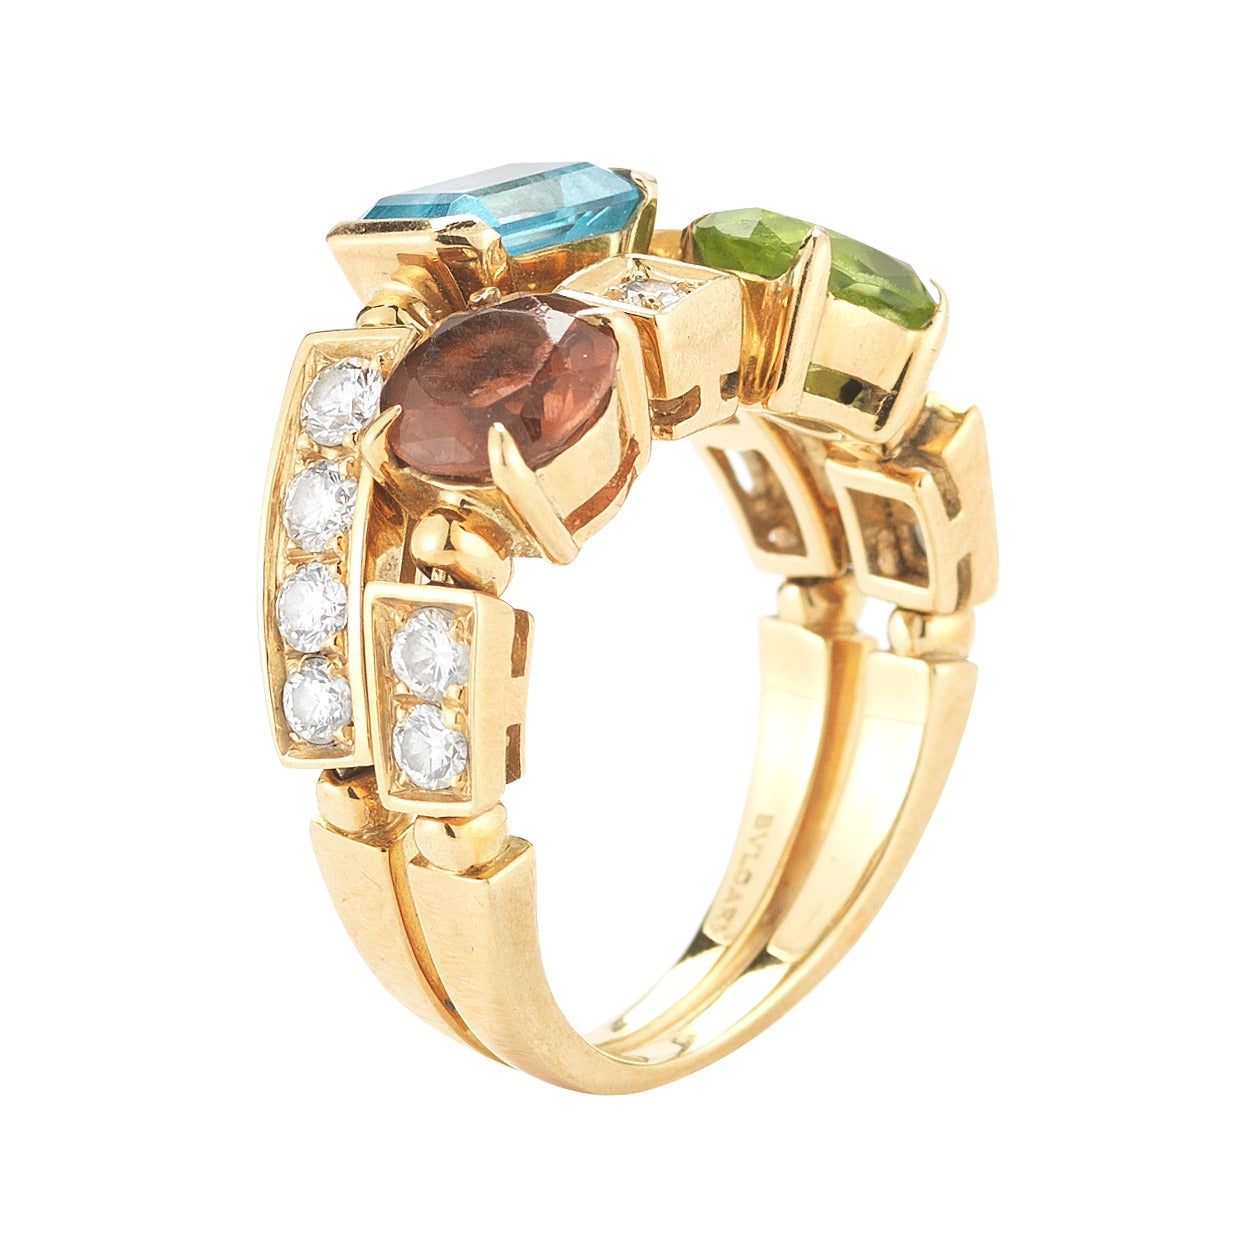 A beautiful and special 18K yellow gold BVLGARI ring from the Allegra Collection. This ring has alternating colored stones (citrine, tourmaline, blue topaz and peridot) and pave diamonds. It can be worn on any finger, for any occasion. Stamped